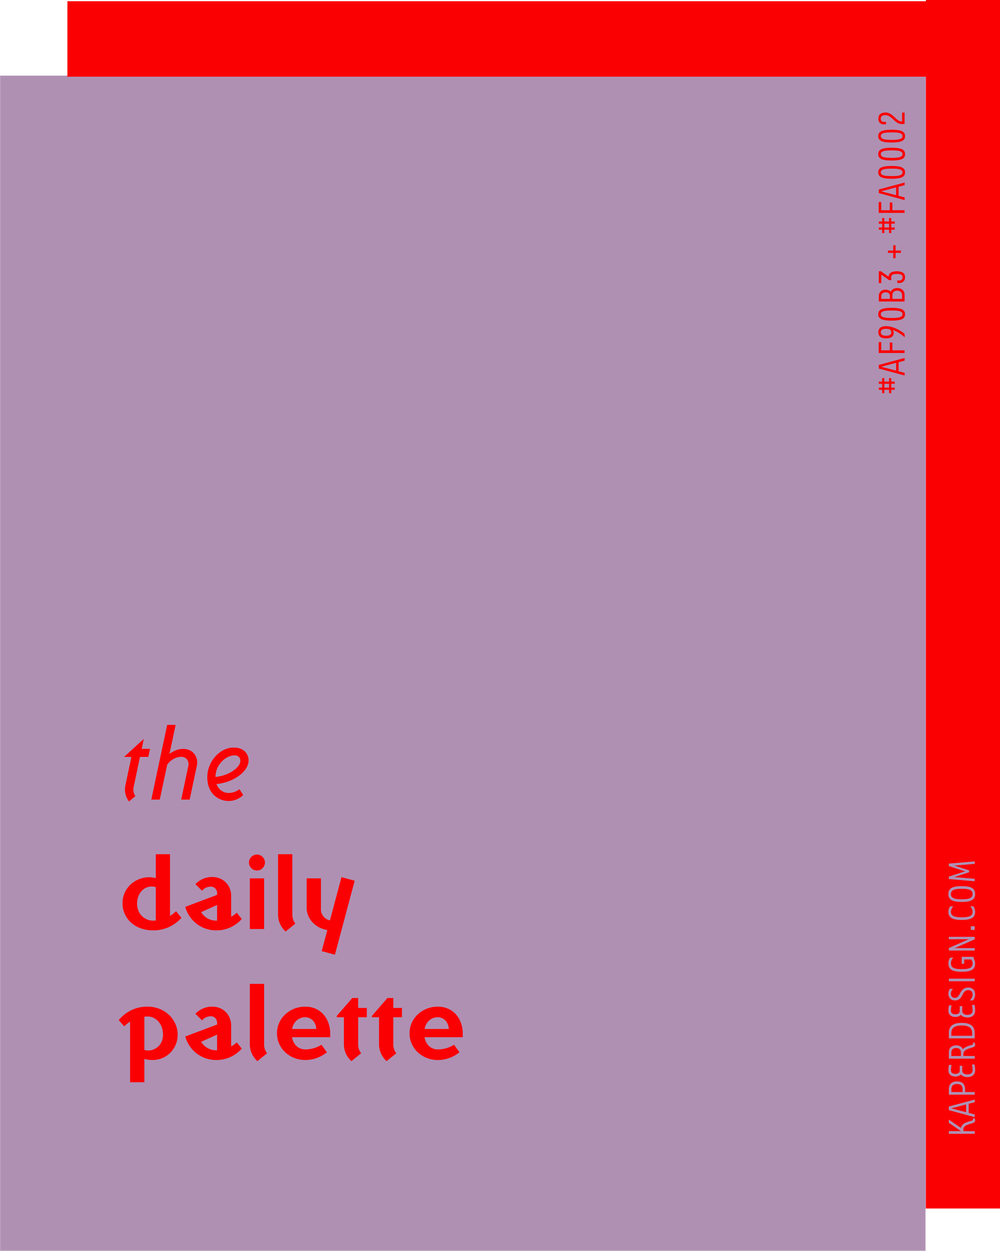 Kaper Design_the Daily Palette Project-16.png